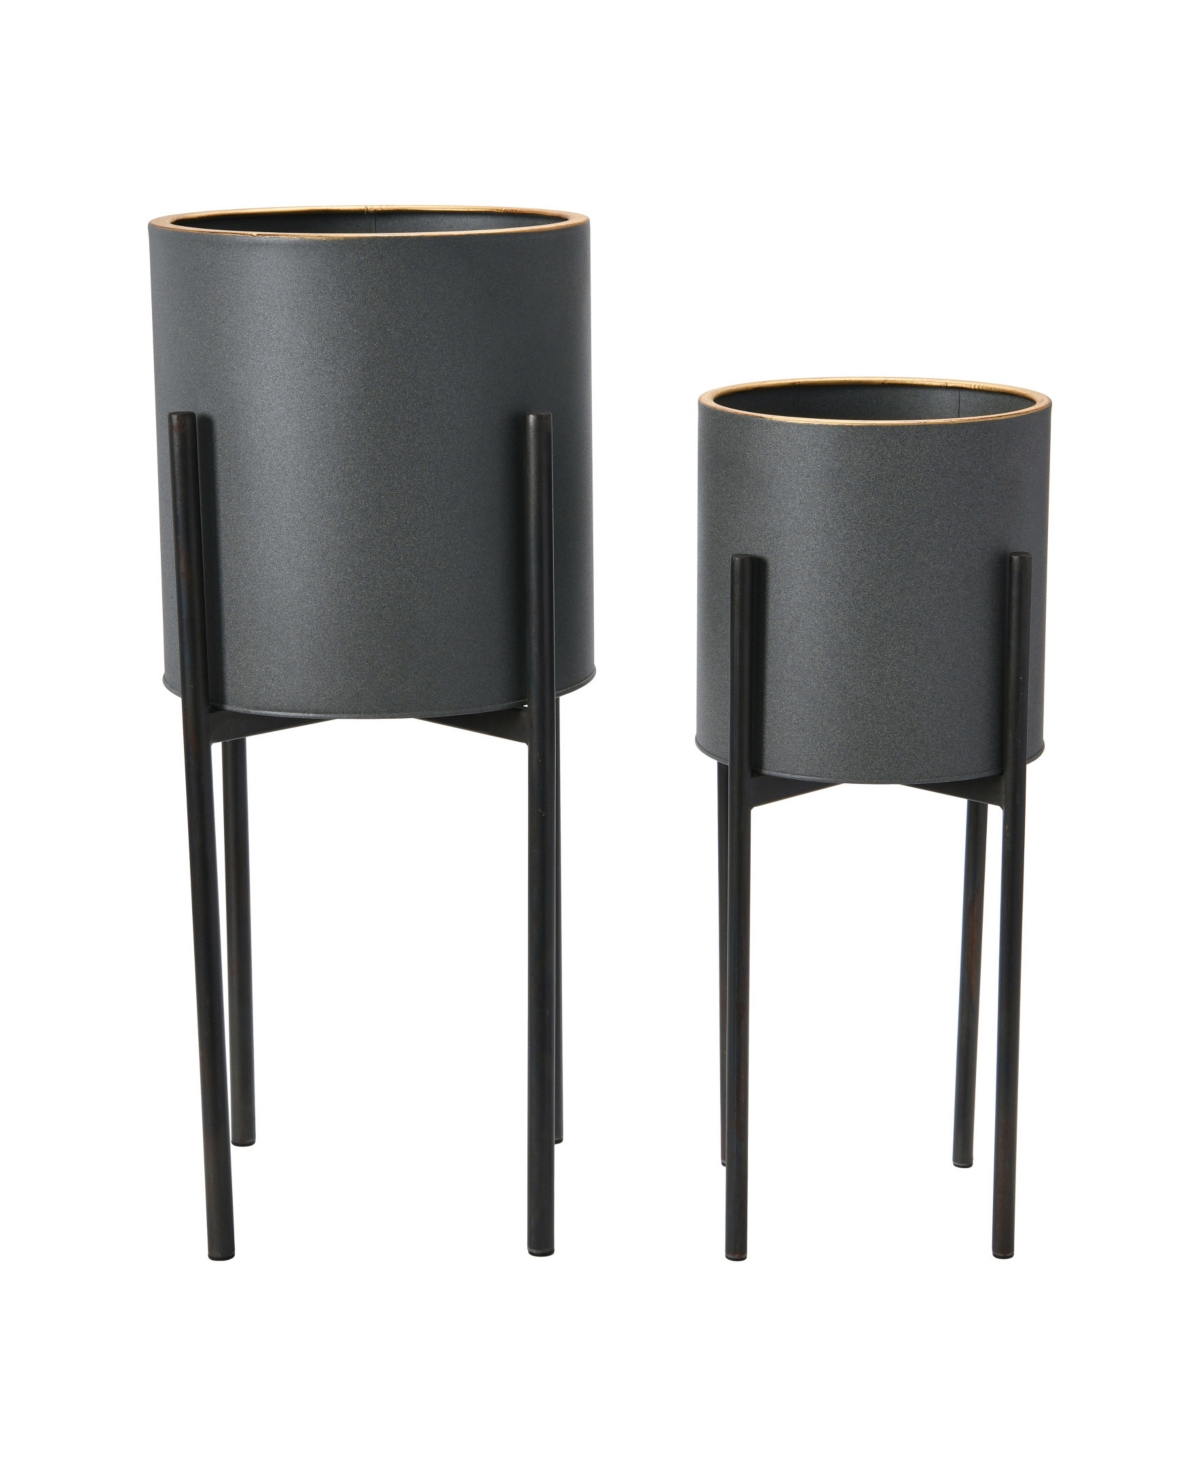 Modern Boho Metal Planters with Gold-Tone Rim and Stands - Gray